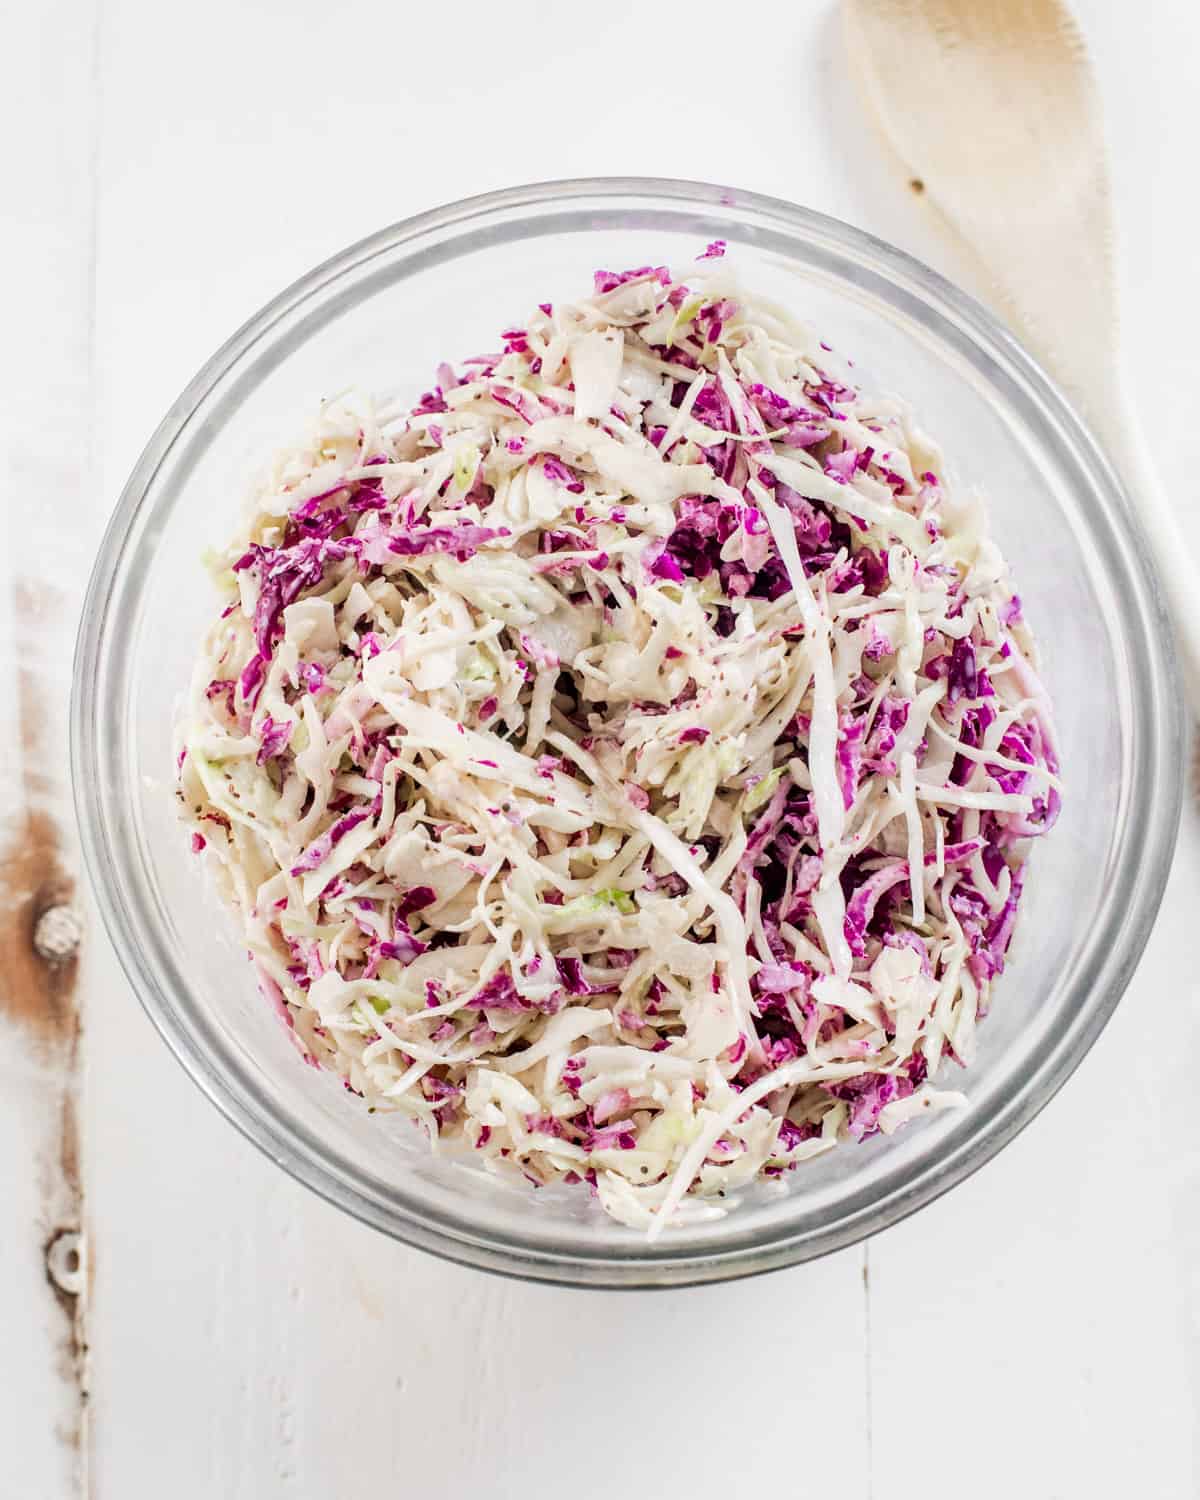 coleslaw in a glass bowl with red and green cabbage